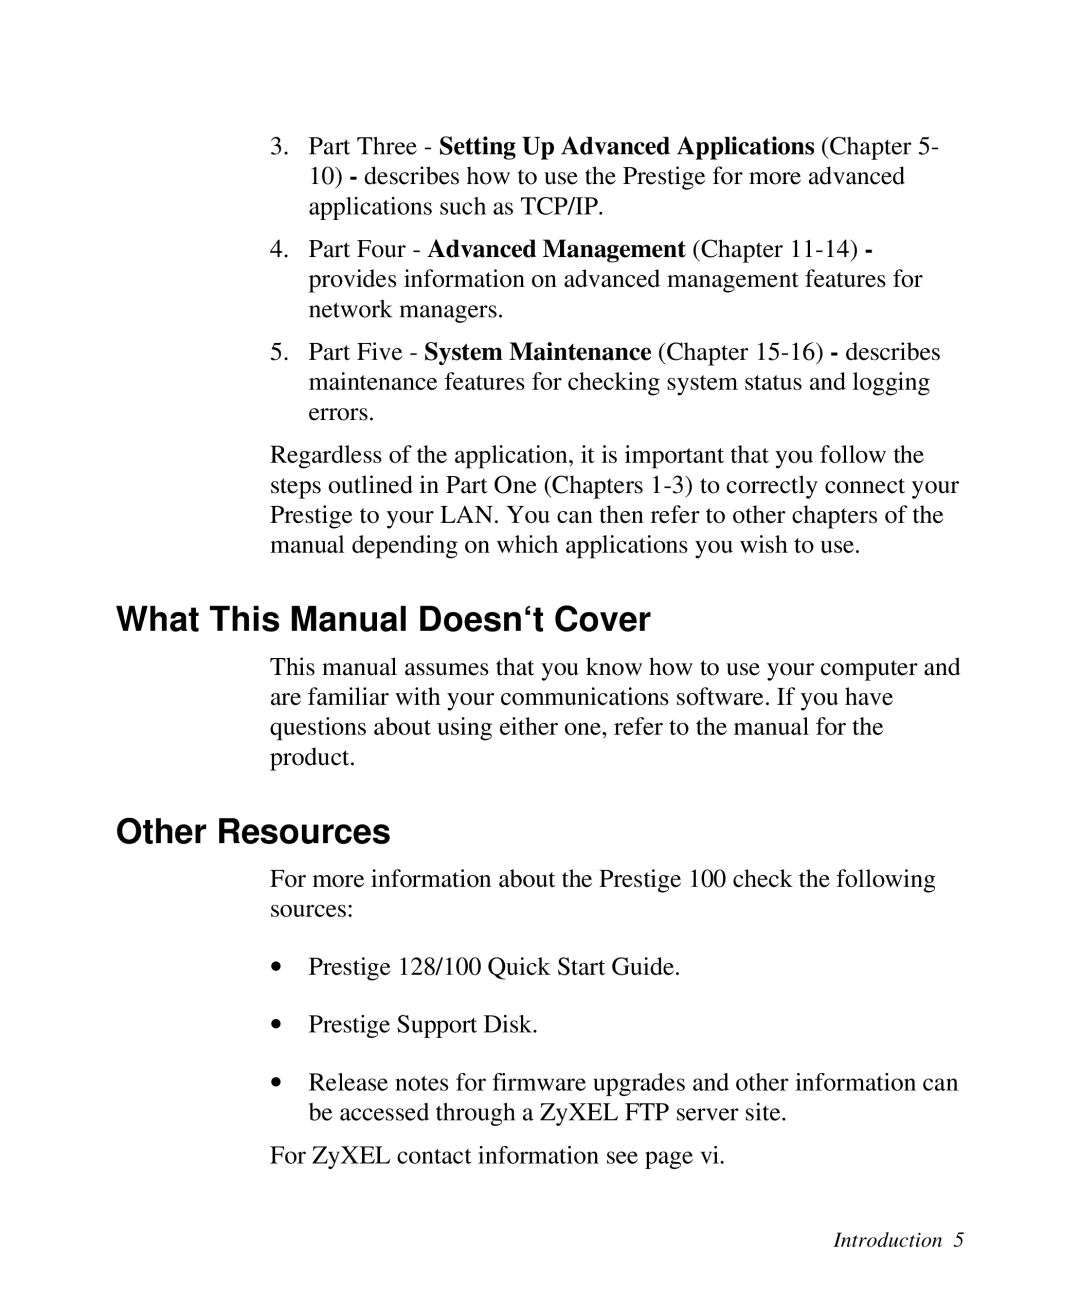 ZyXEL Communications Prestige100 user manual What This Manual Doesn‘t Cover, Other Resources 